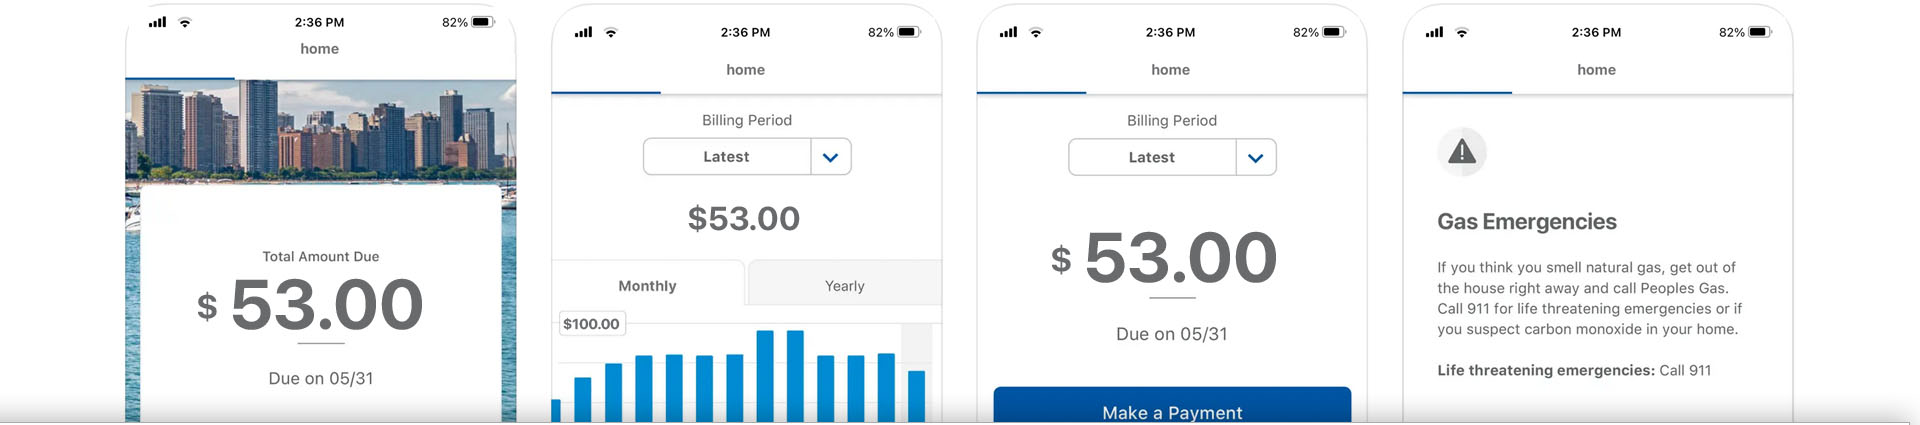 Peoples Gas app screens showing outage, payment, bill examples